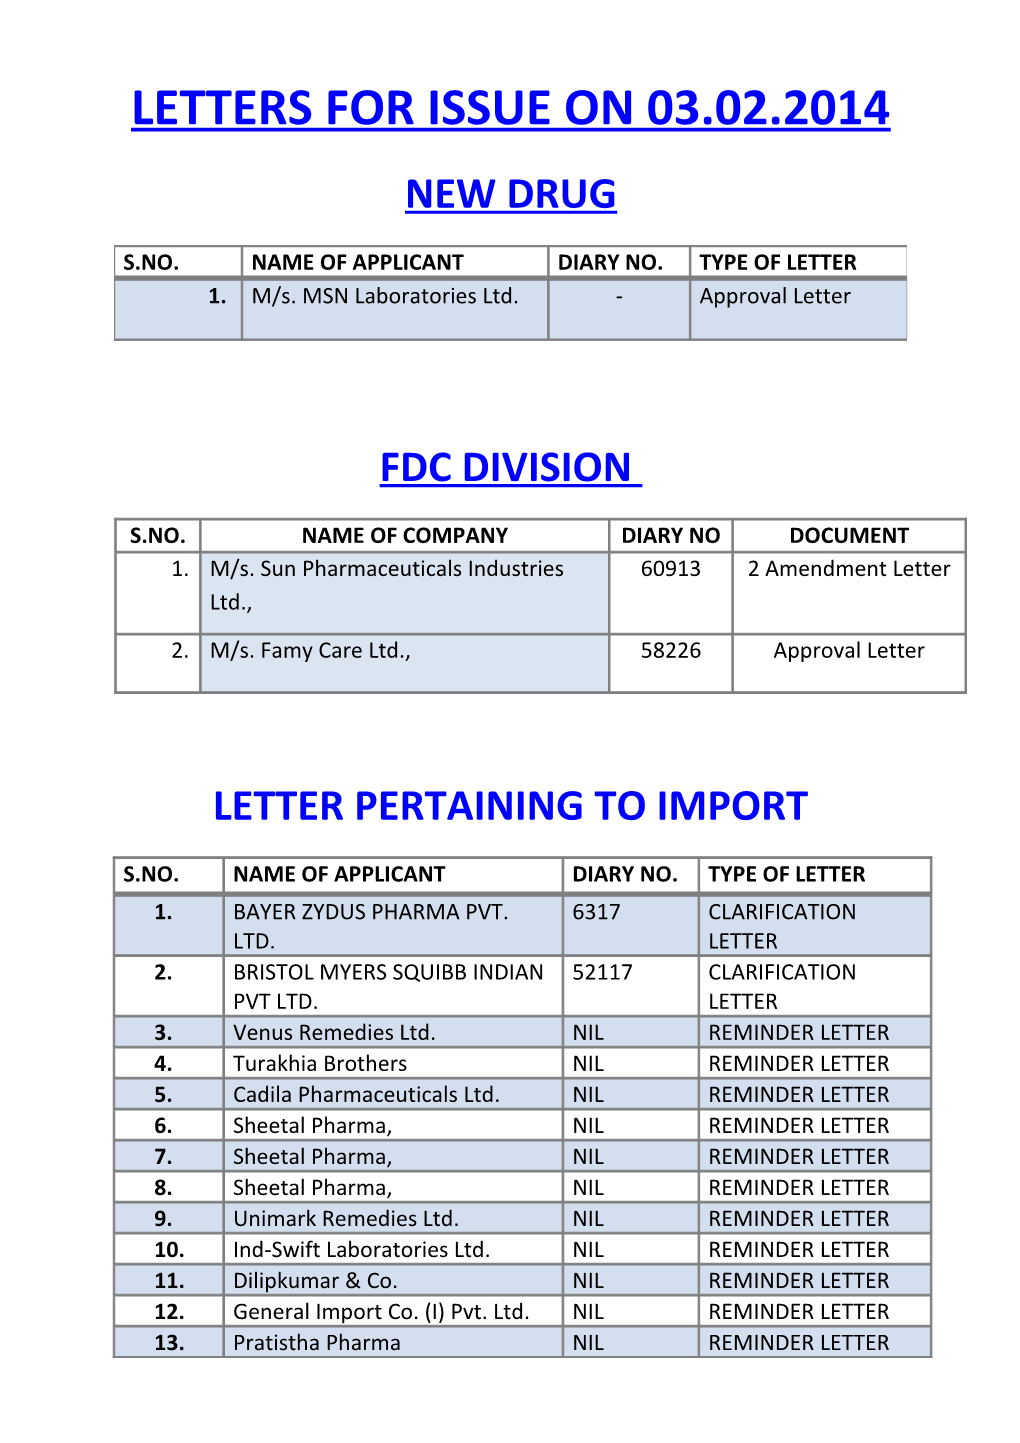 Letters for Issue on 03.02.2014